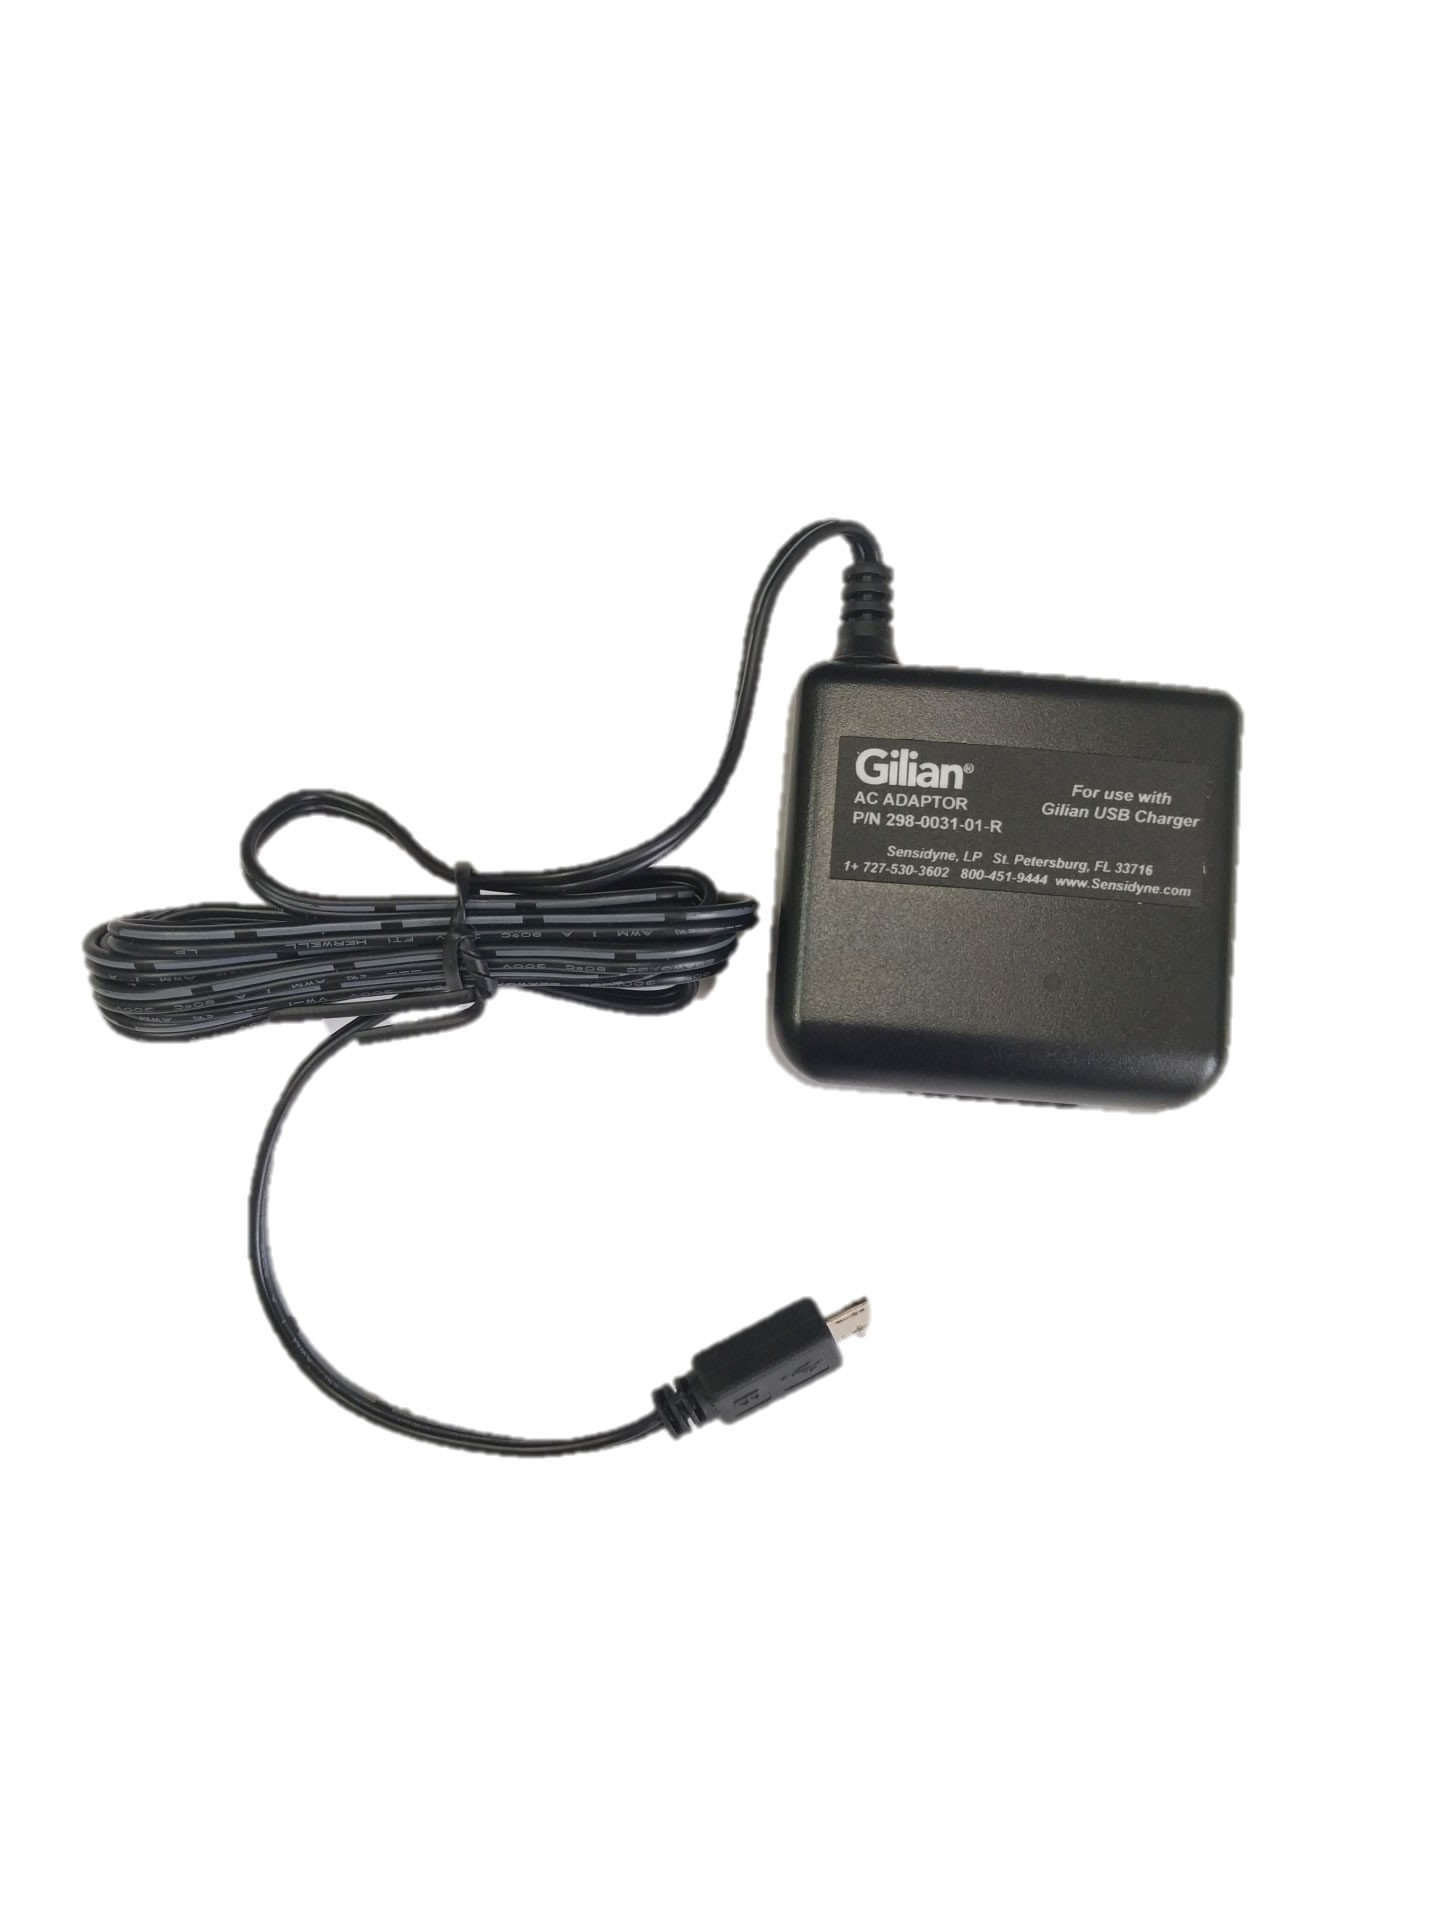 Single Unit Replacement Power Adapter only, USB, BDX-II/GilAir-3/5